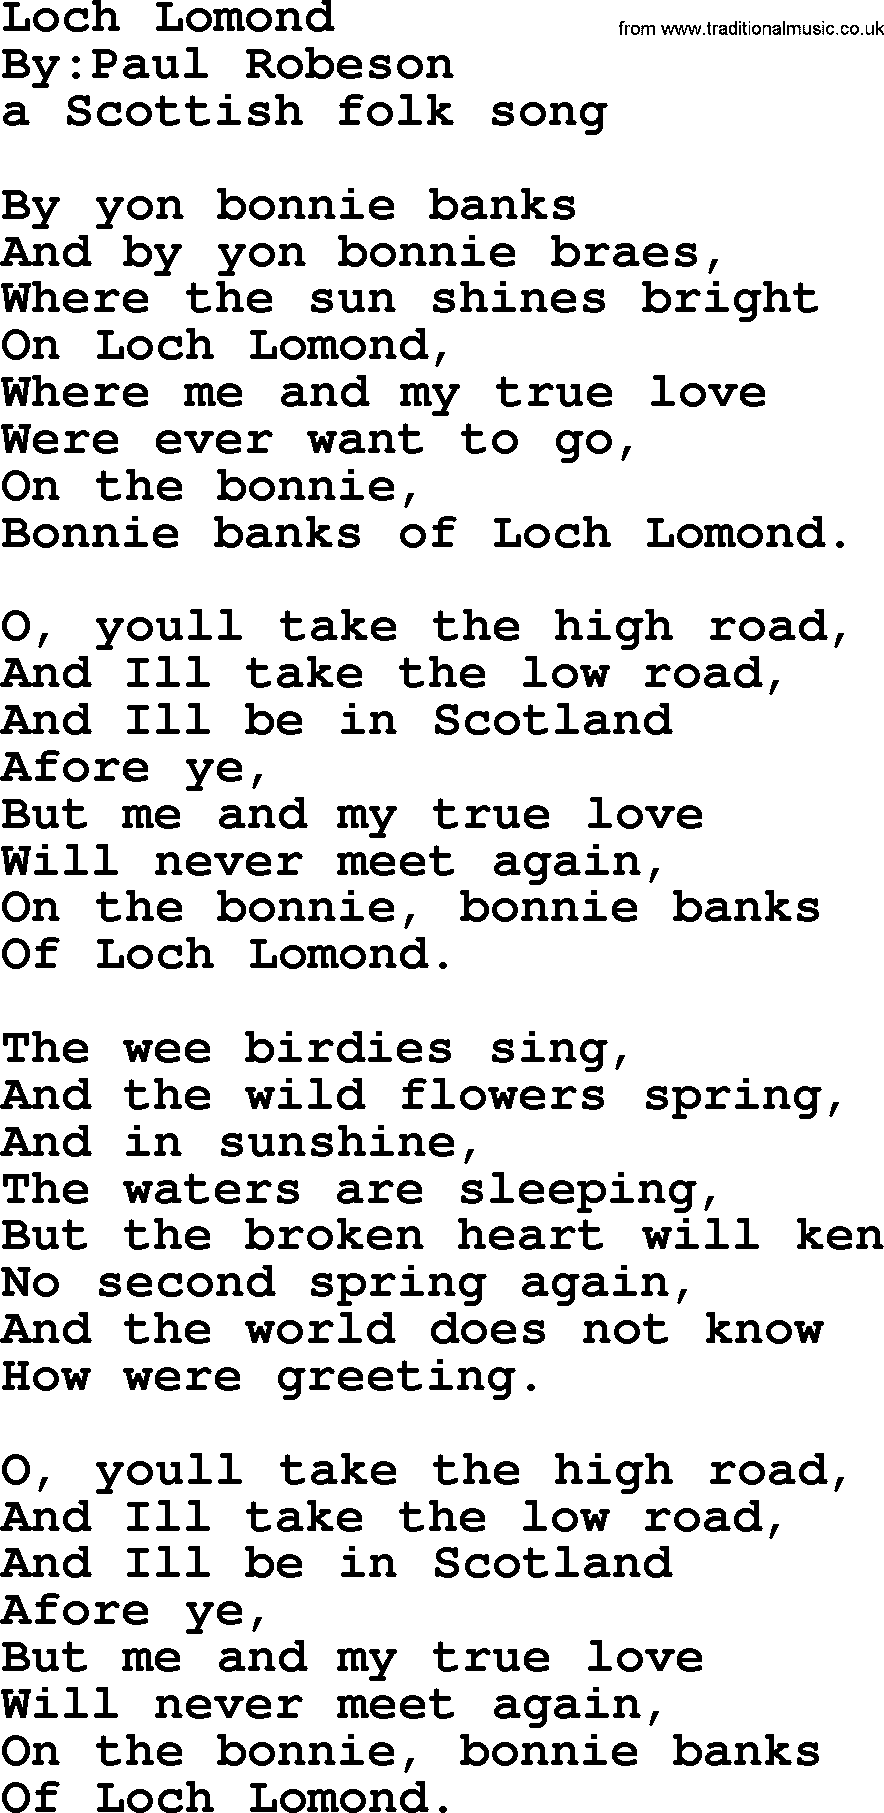 Political, Solidarity, Workers or Union song: Loch Lomond, lyrics